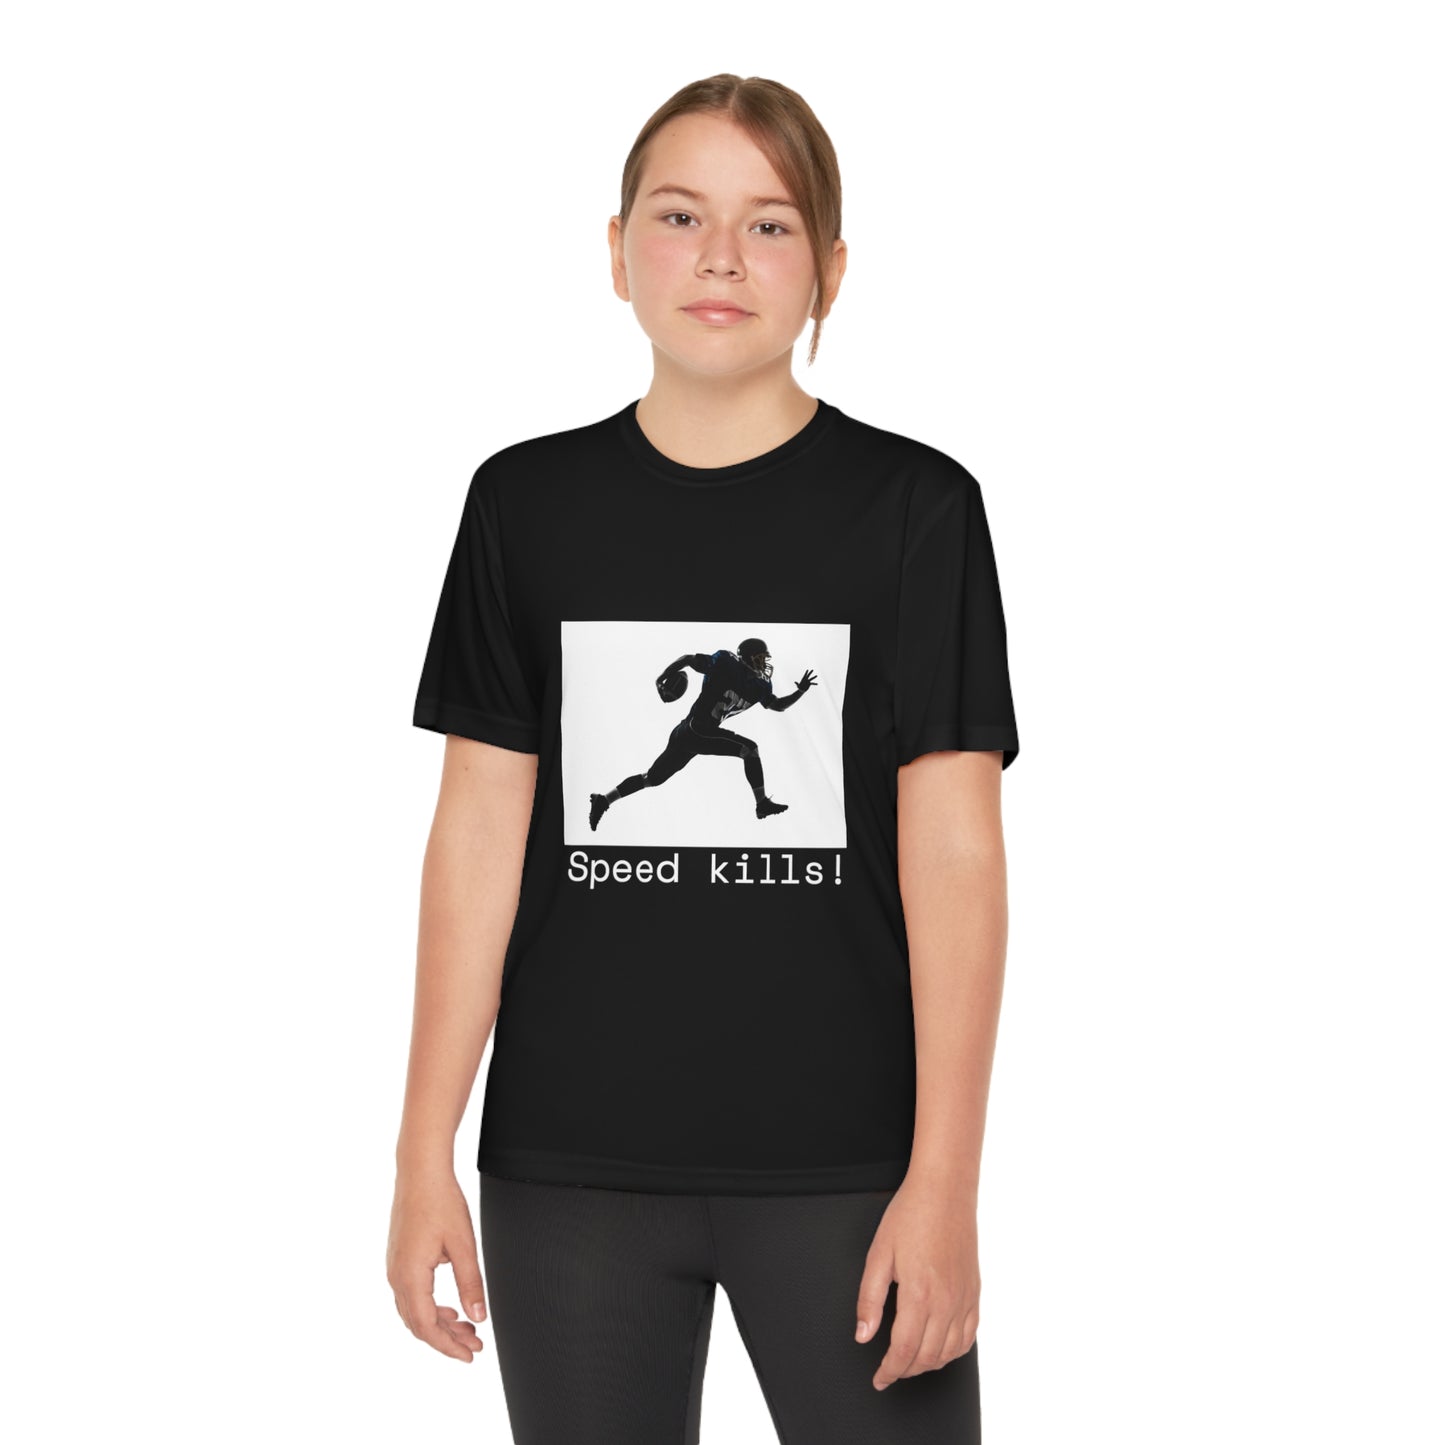 Speed Kills! -Youth Competitor Tee